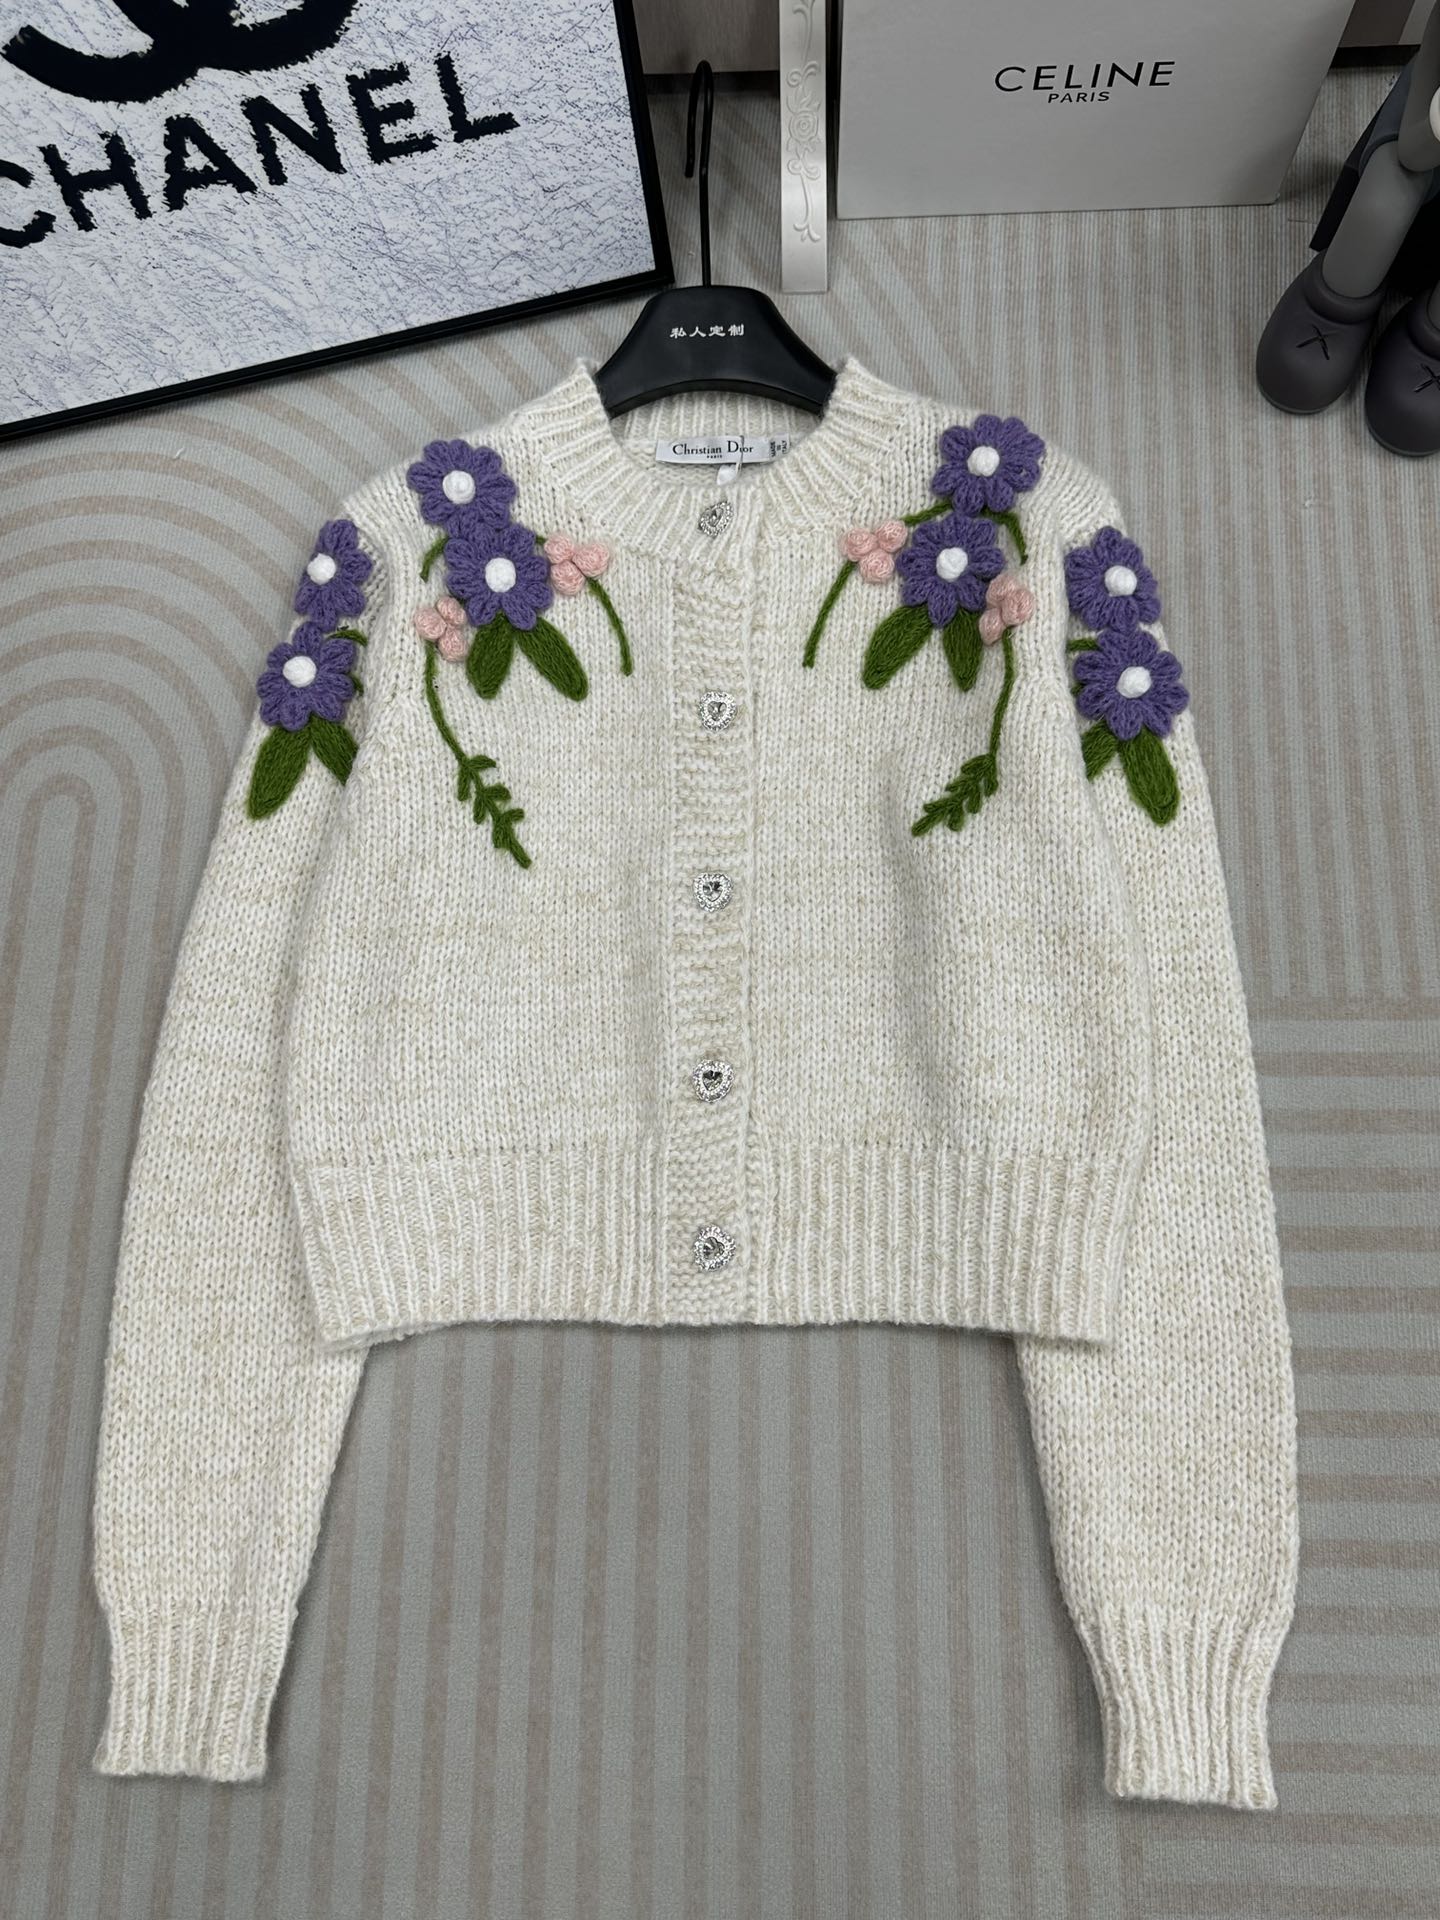 Dior Buy
 Clothing Cardigans Knit Sweater Set With Diamonds Knitting Fall/Winter Collection Fashion